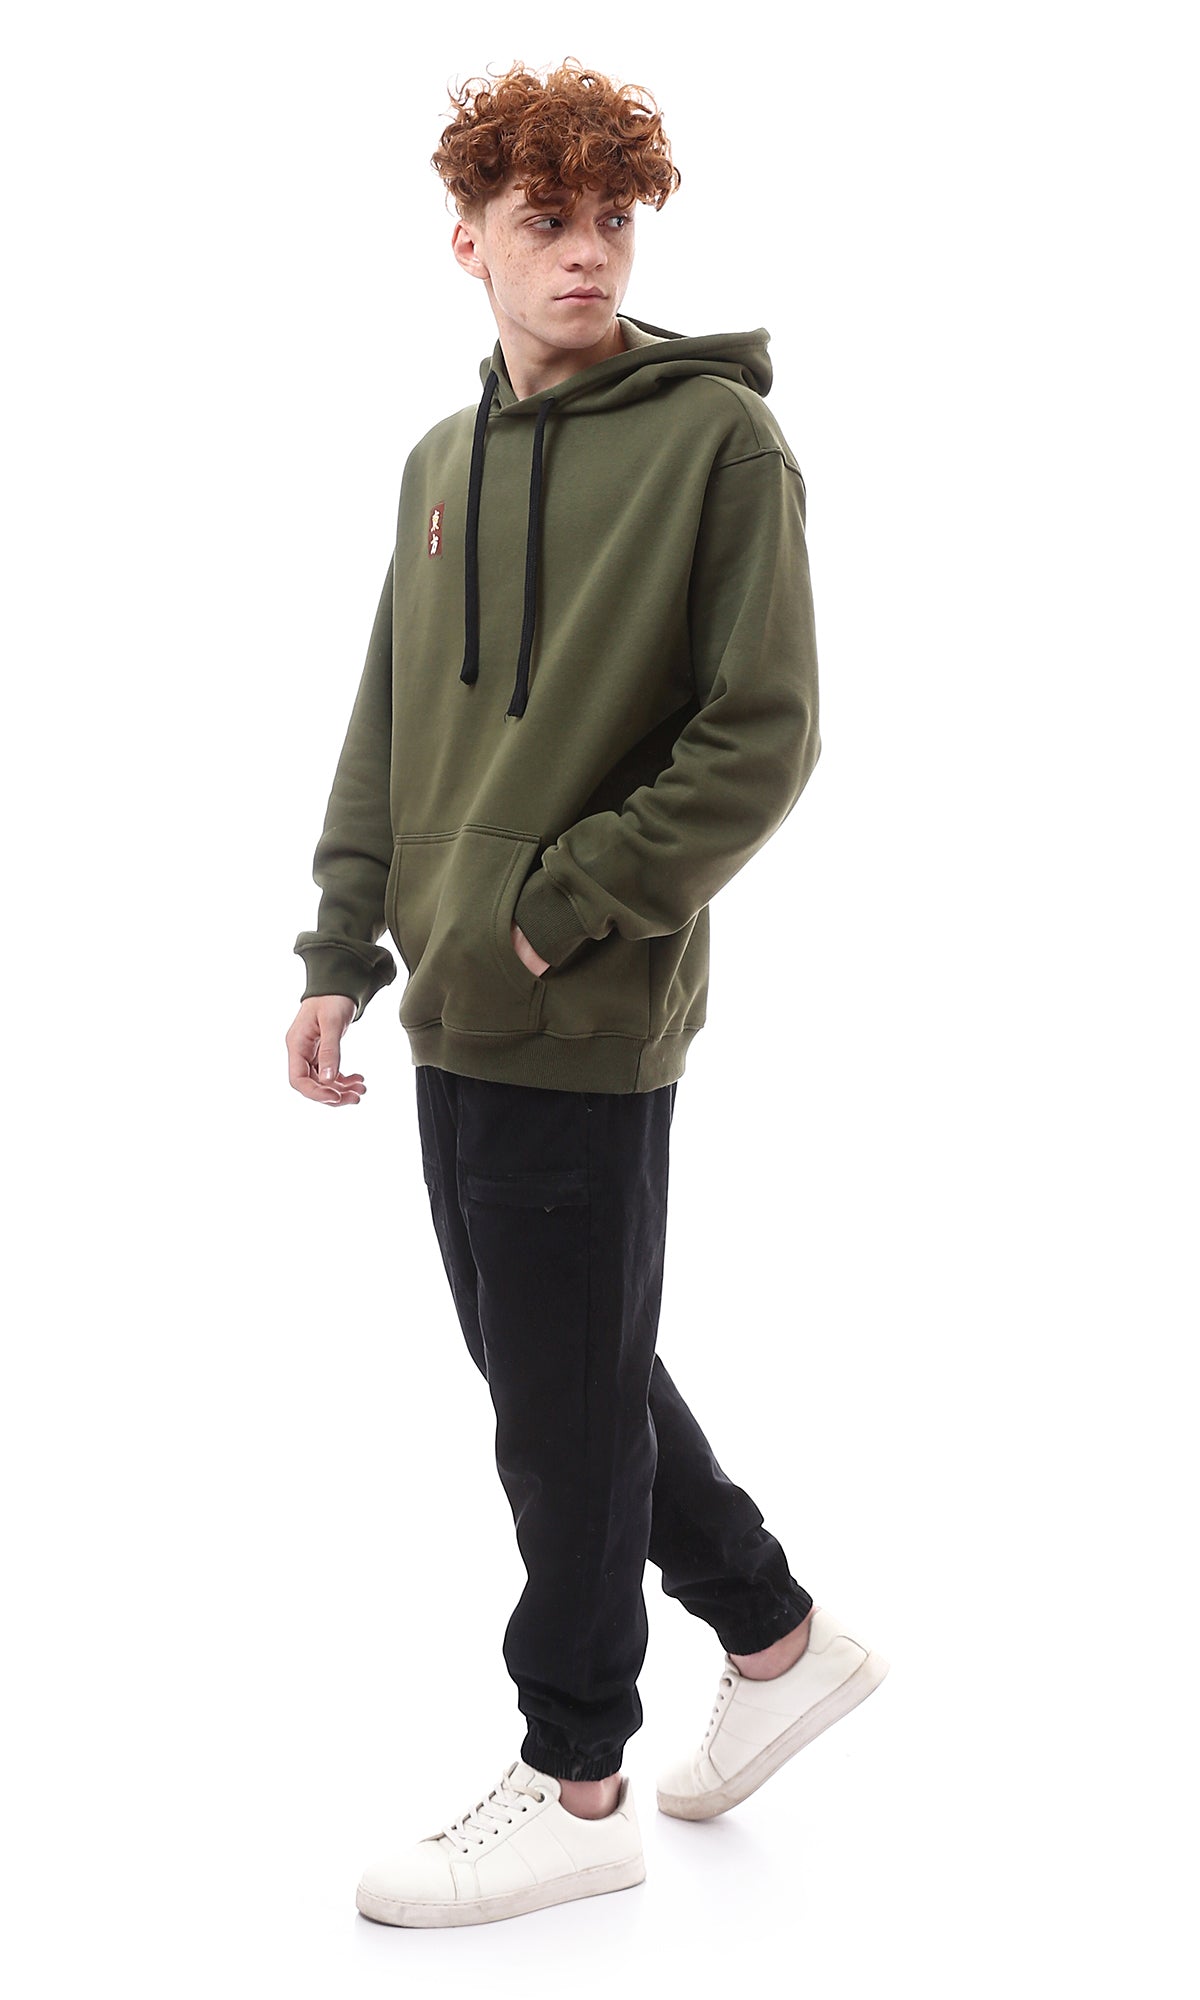 O175771 Dark Olive Cotton Hoodie With Front & Back Print